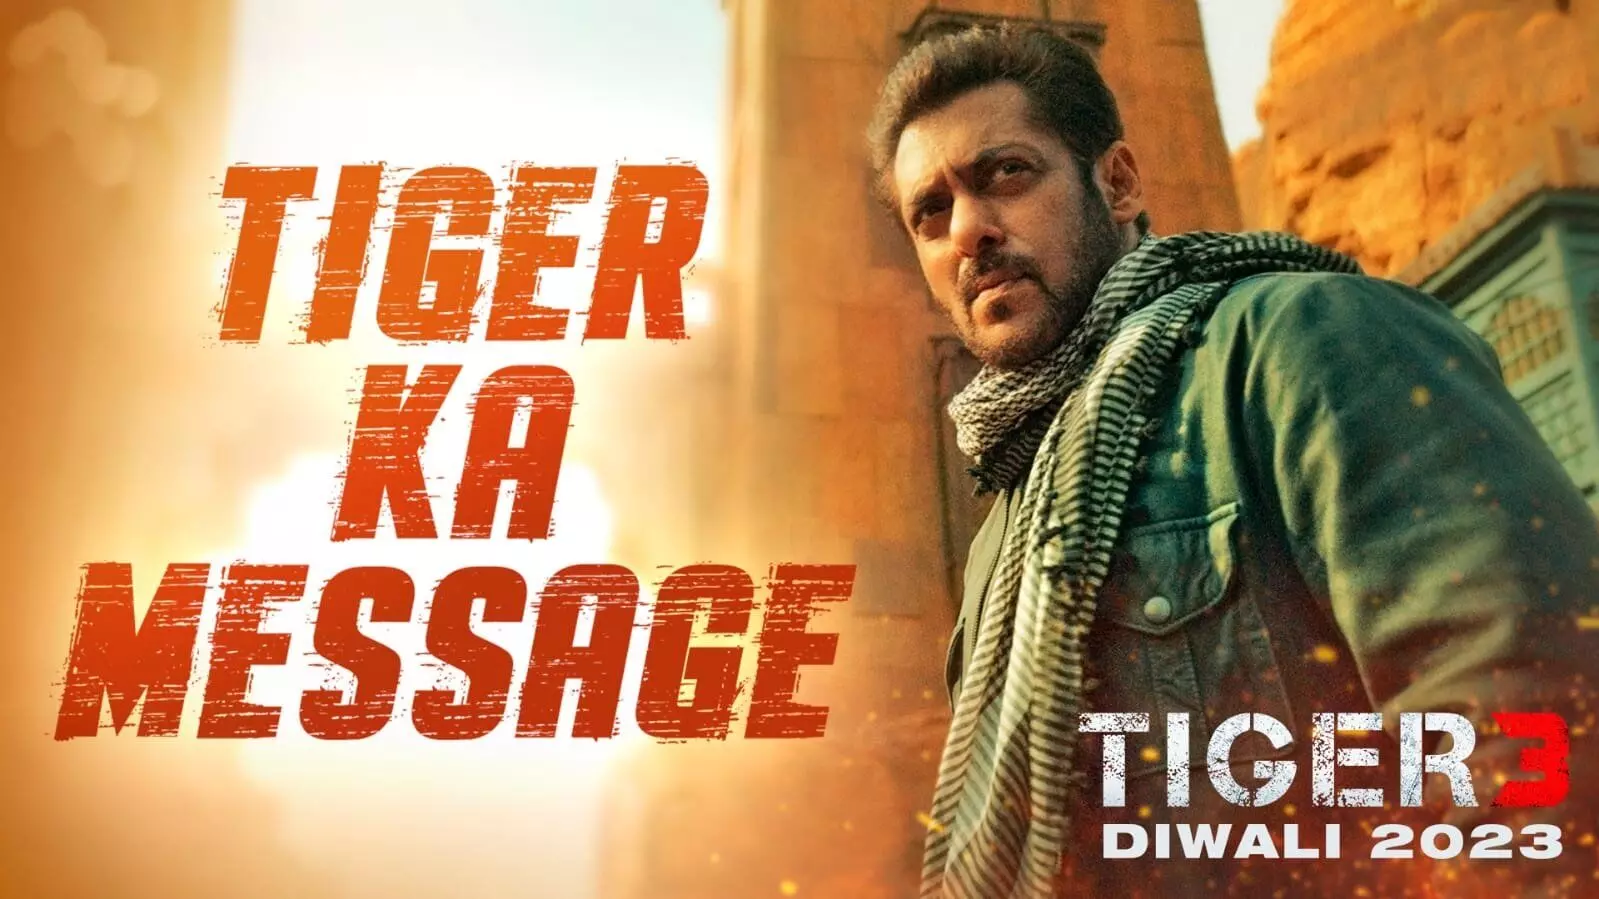 Salman’s ‘Tiger’ hunts with vengeance to clear his name in ‘Tiger 3’